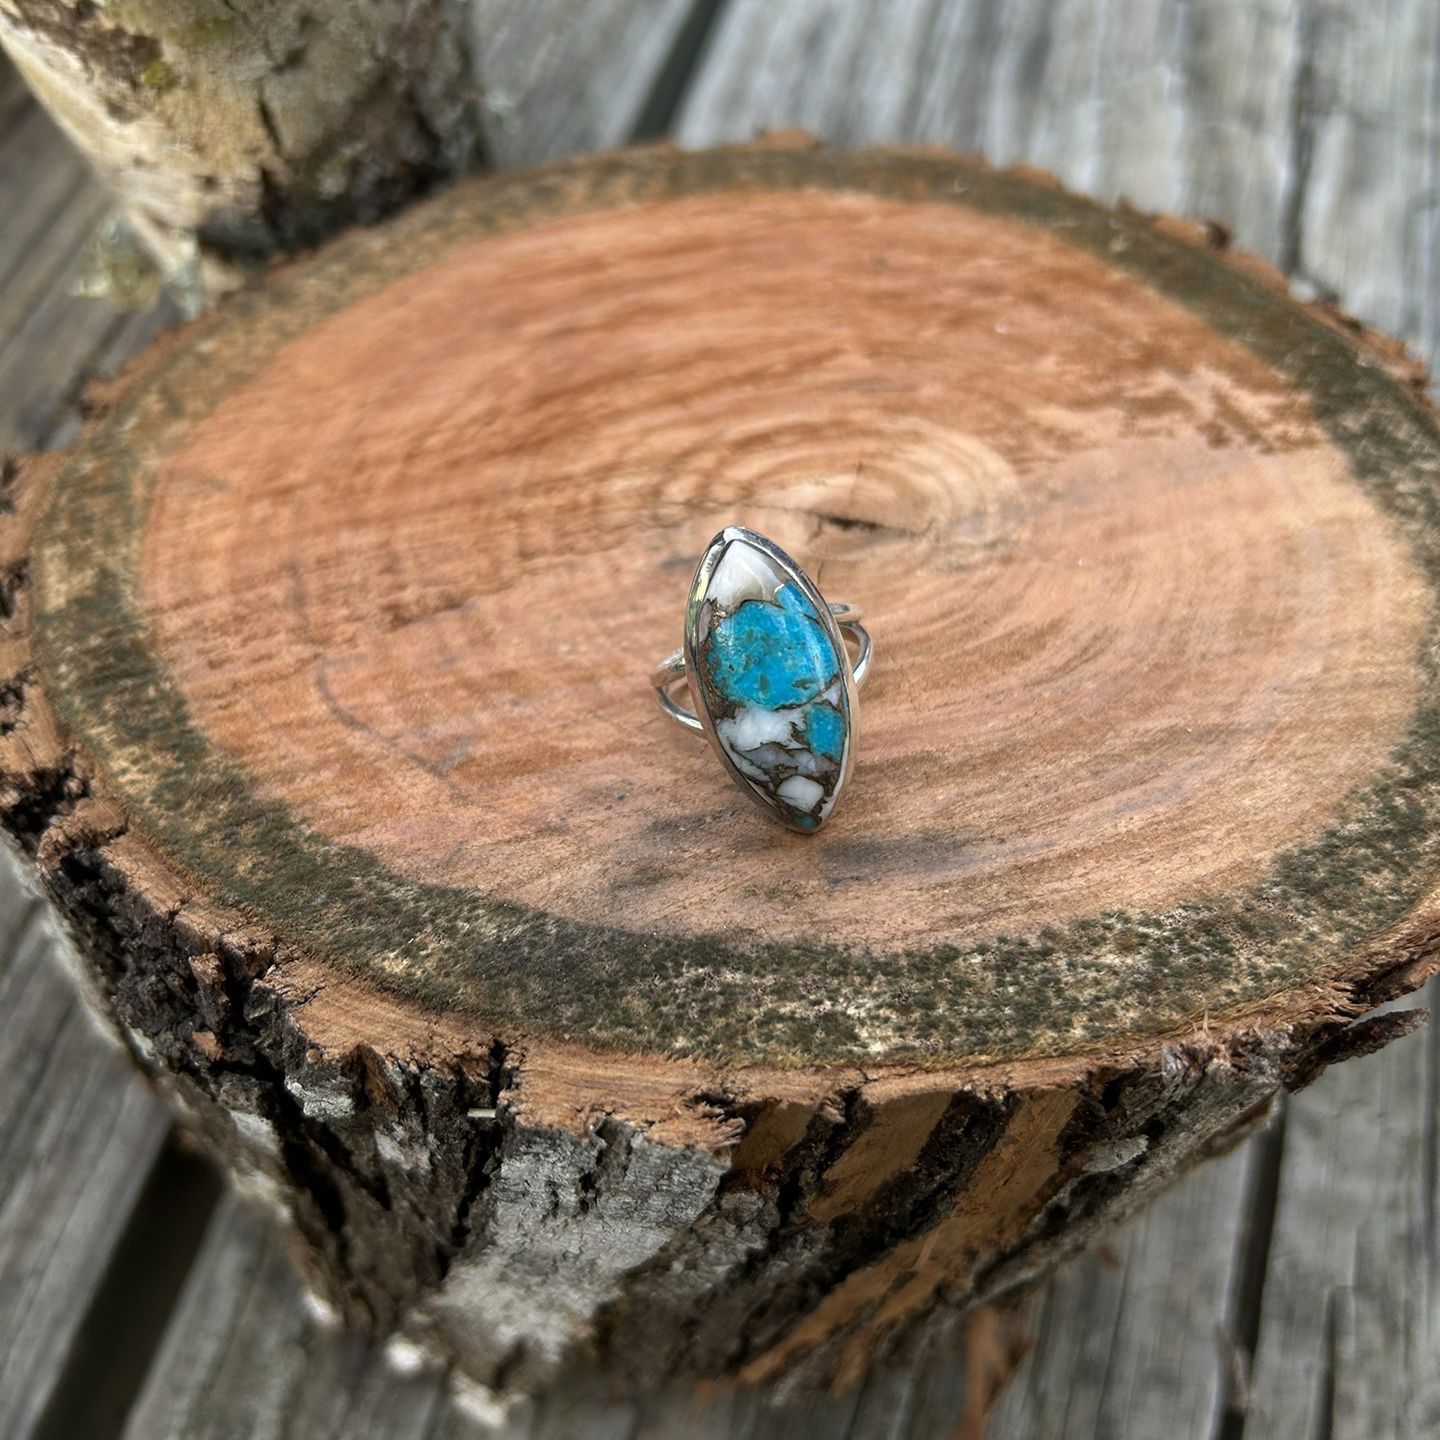 Turquoise ring, set in 925 sterling silver.